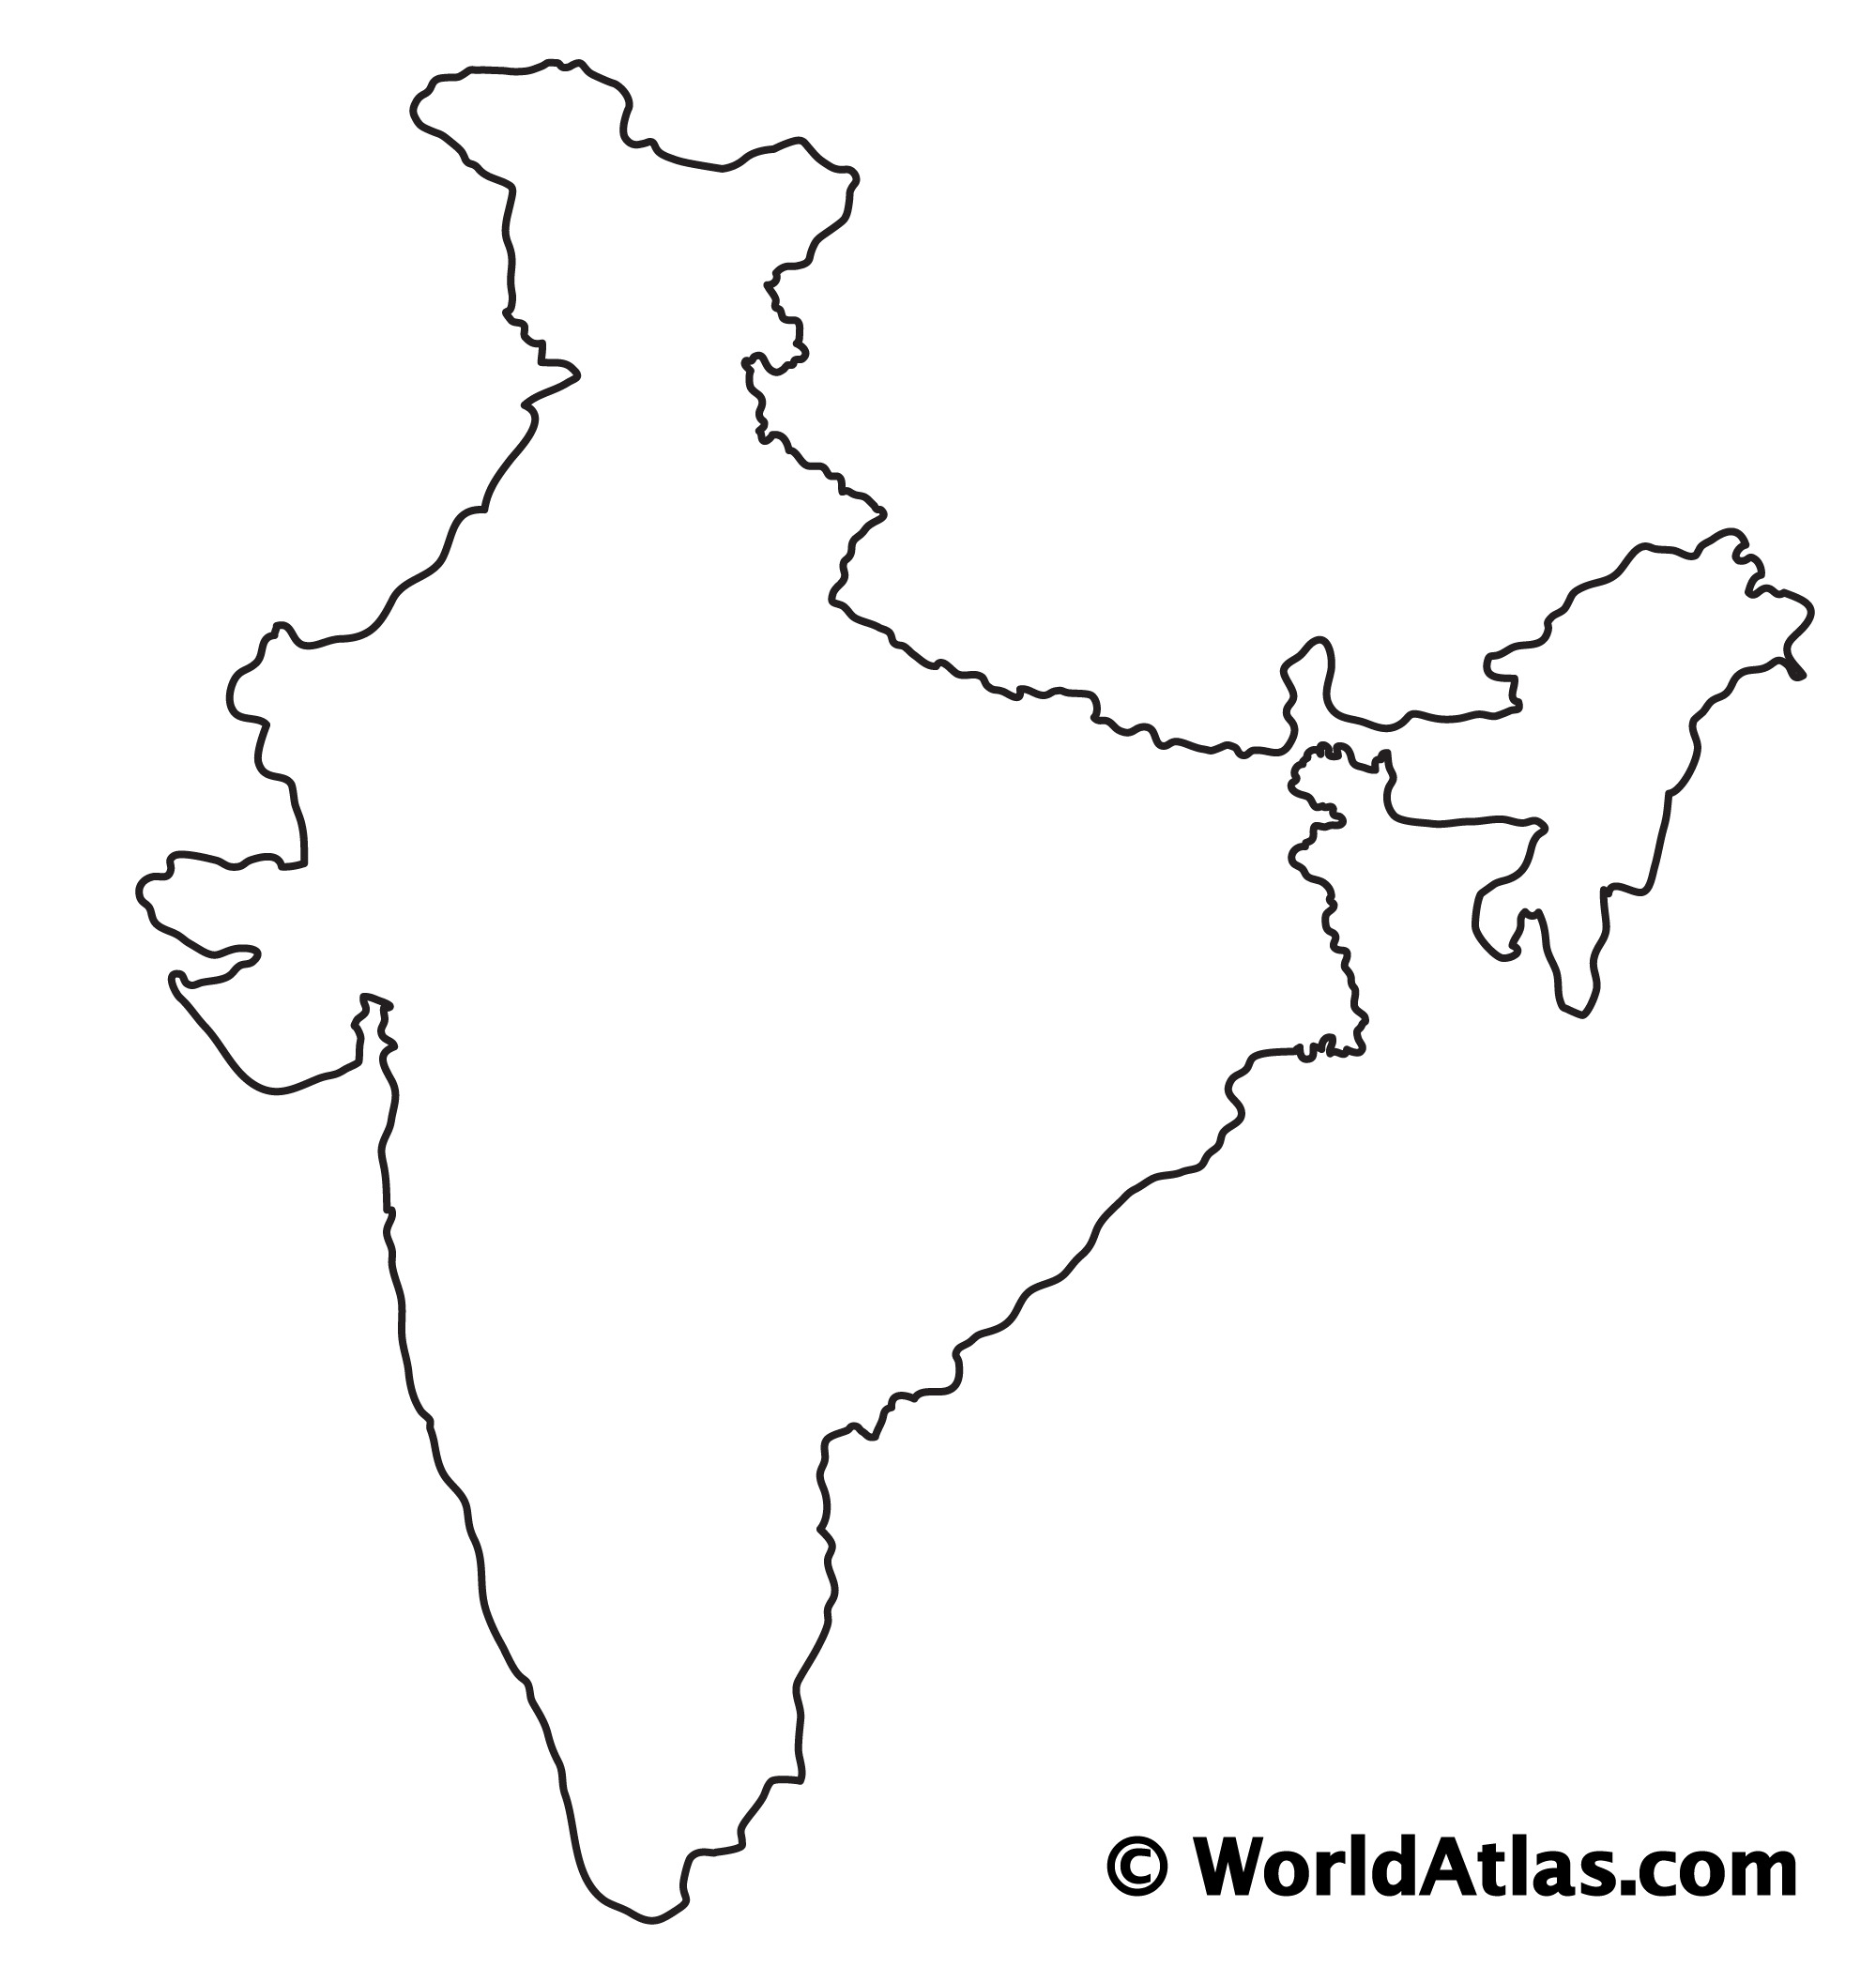 India Outline Map